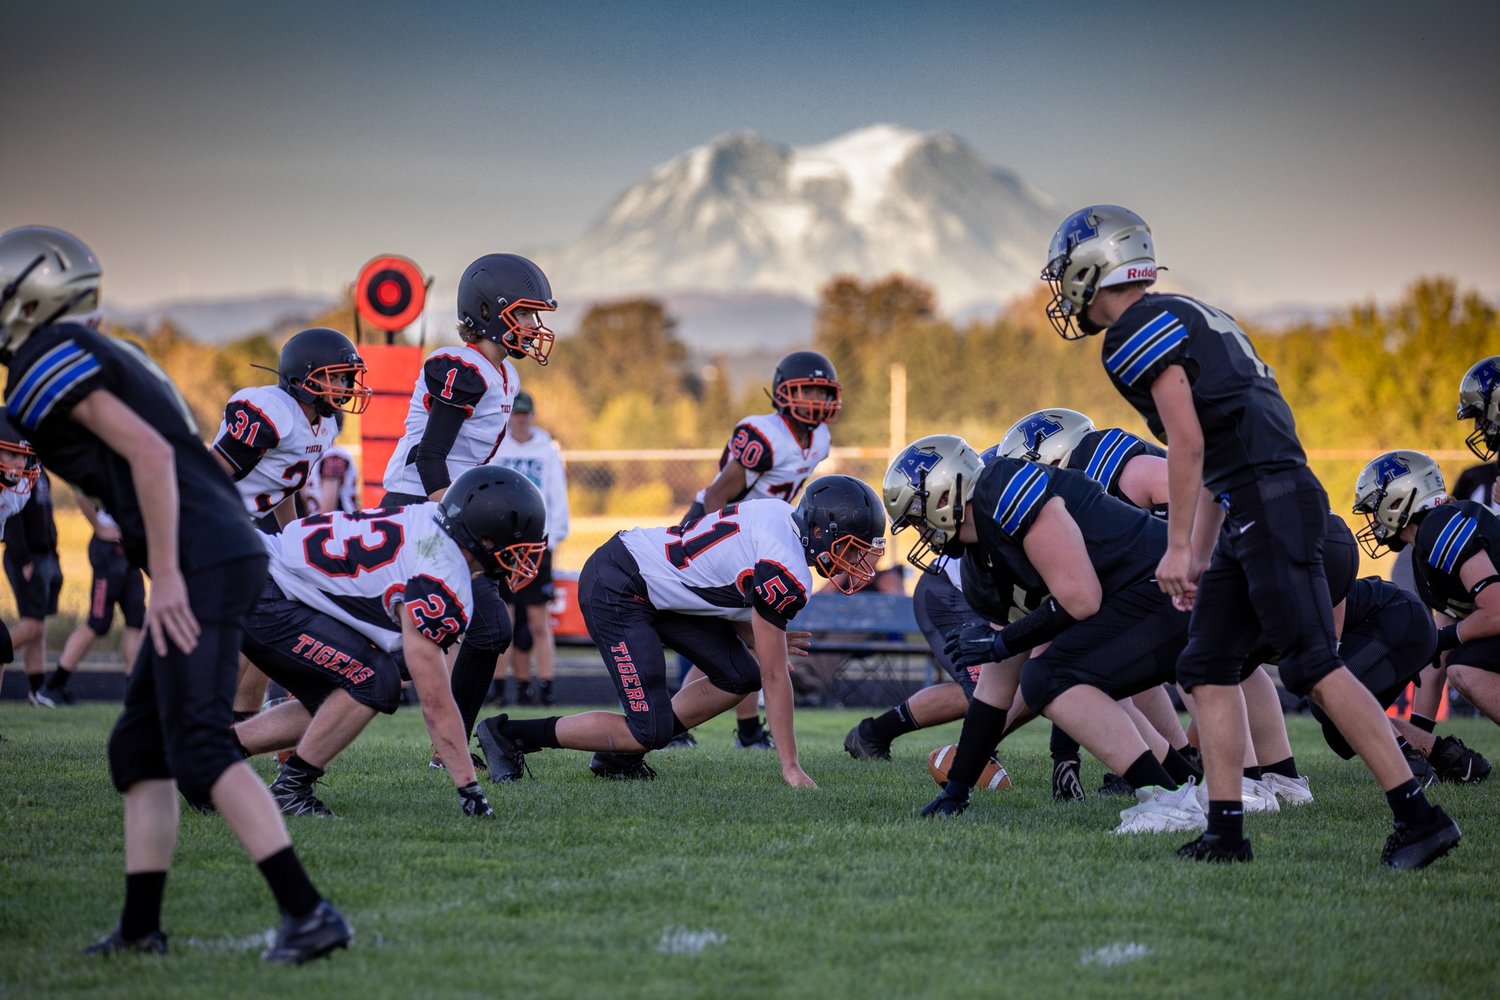 Local photographer John Anders captured this fantastic photograph as the Napavine and Adna junior varsity teams played in Adna on Monday. “High school football in western Washington in an image,” he wrote to The Chronicle. Napavine won 32-6.